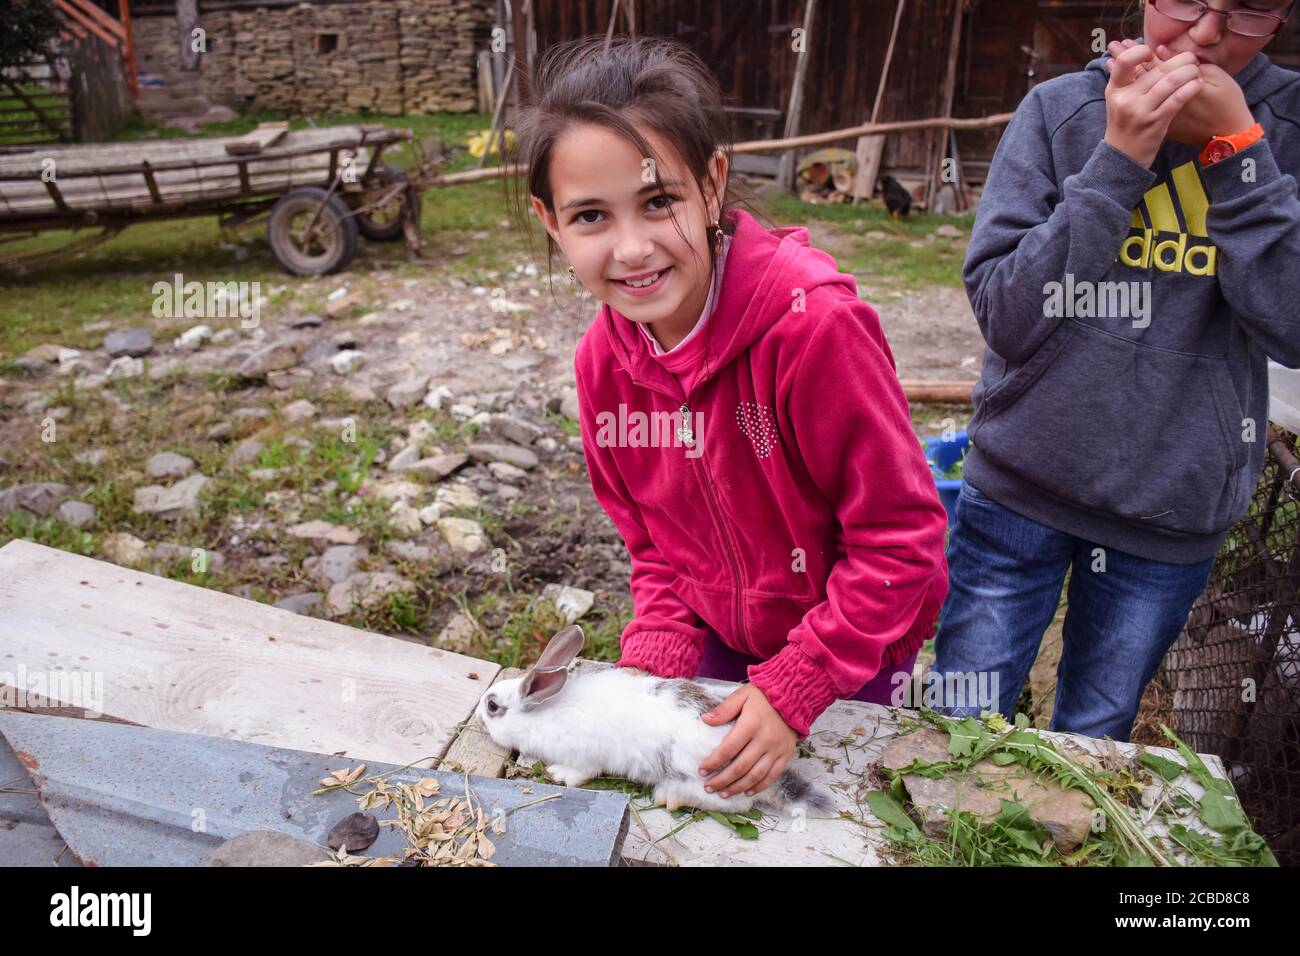 Maramures / Romania - August 28, 2019: nice romanian girl playing with a white rabbit in rural area farm Stock Photo